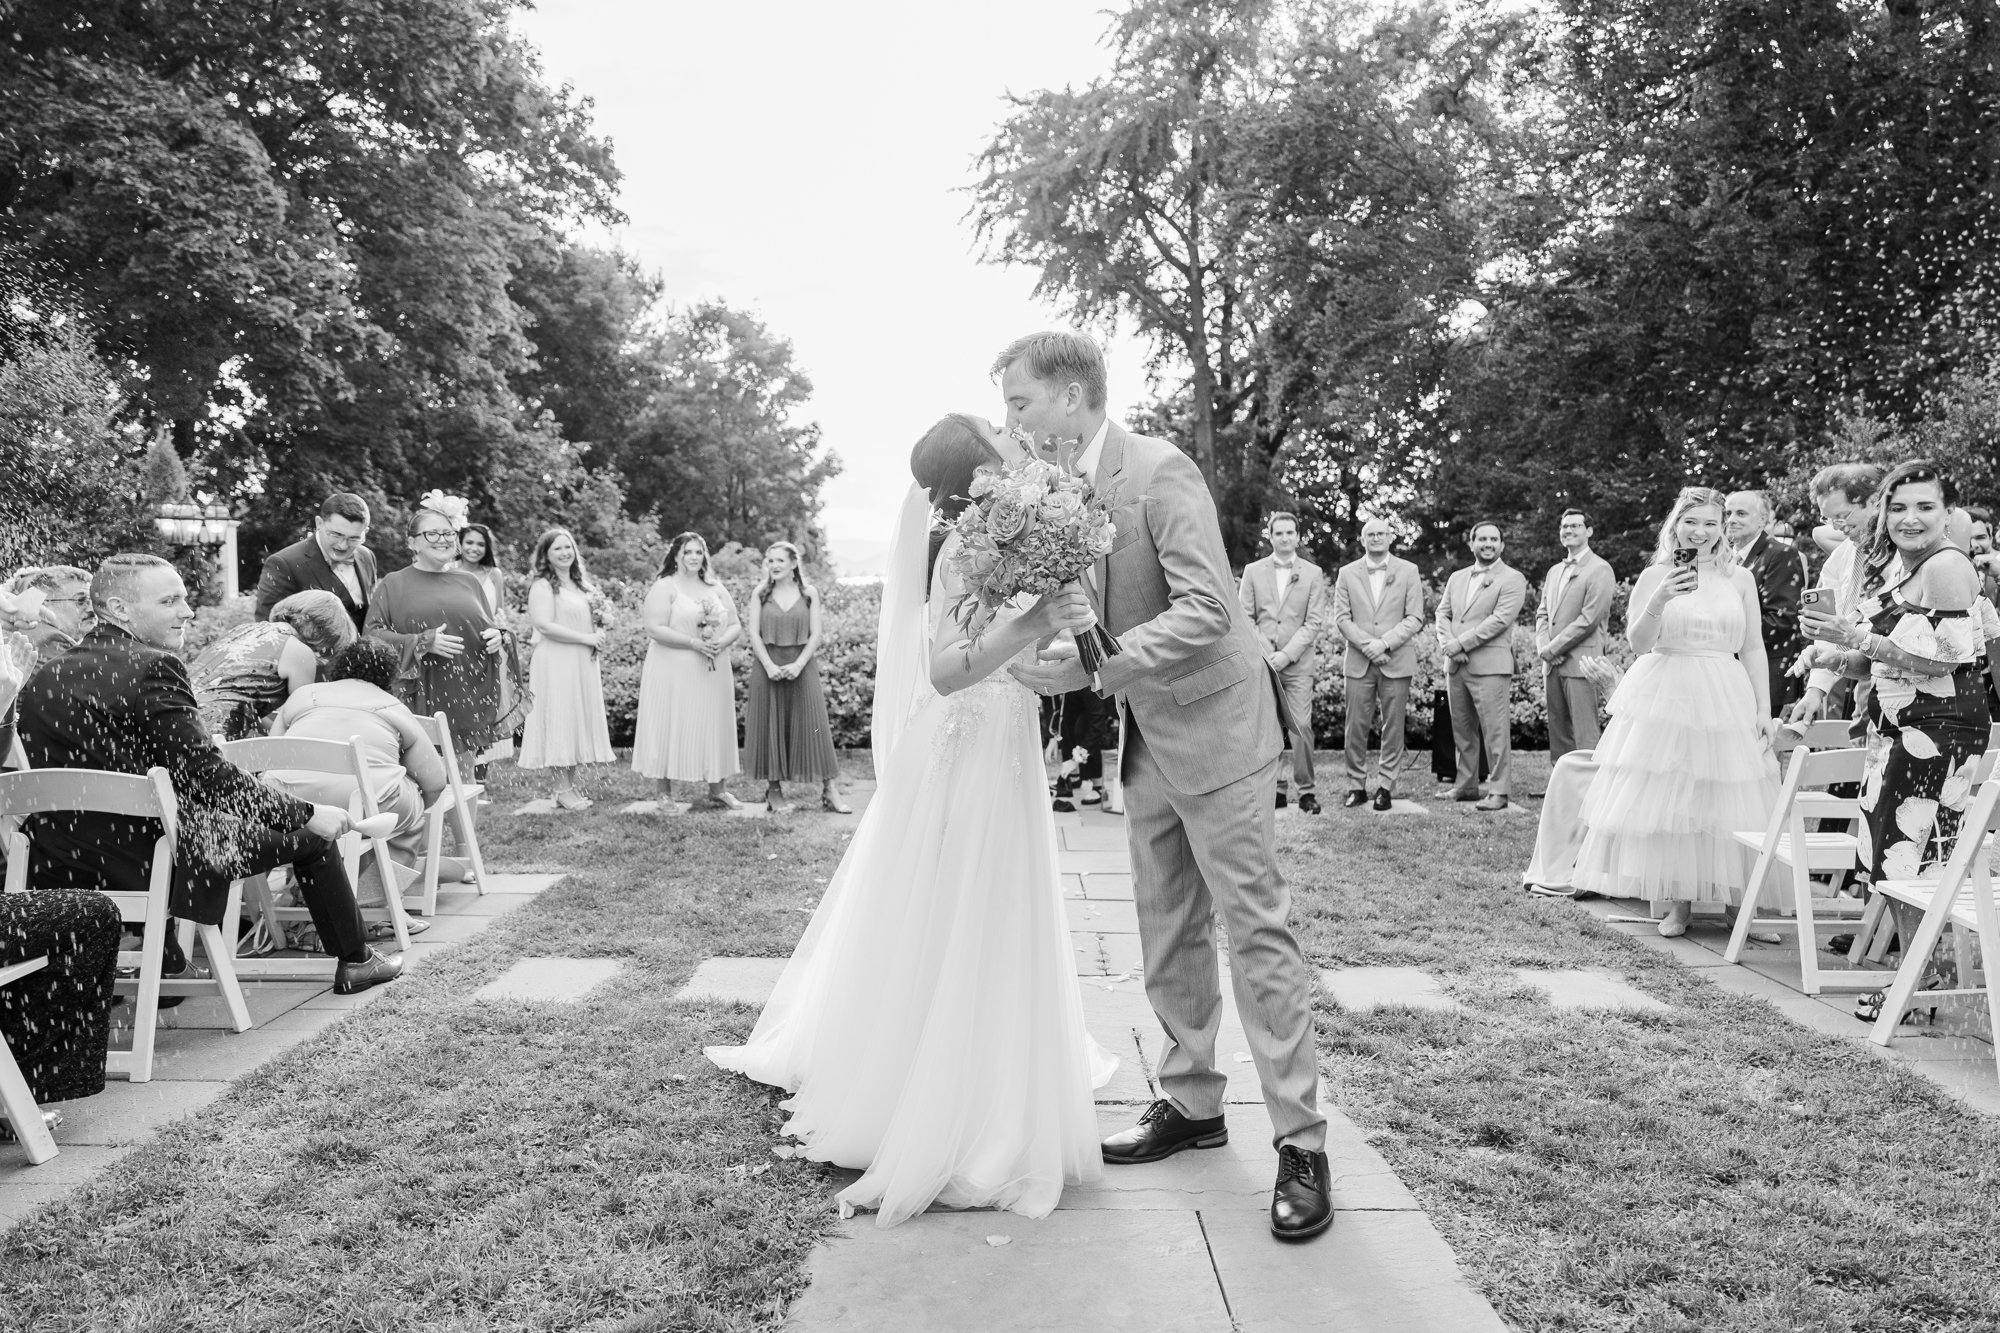 Magical Wedding at Briarcliff Manor in Summertime